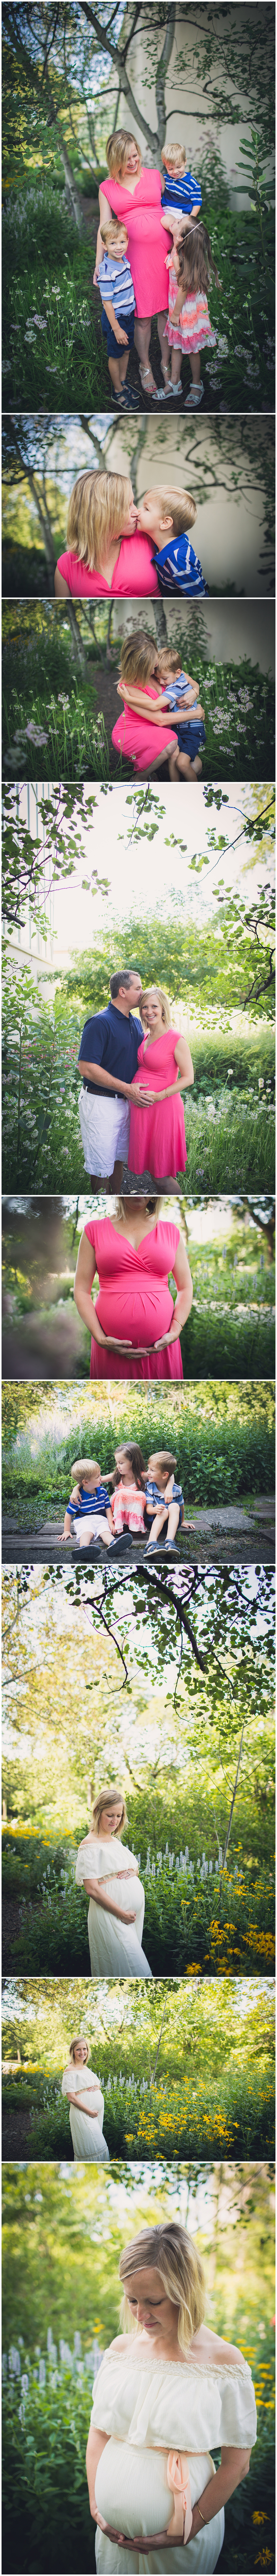 Baby #4 is almost here! | Chicago Maternity Photographer | Patricia Anderson Photography